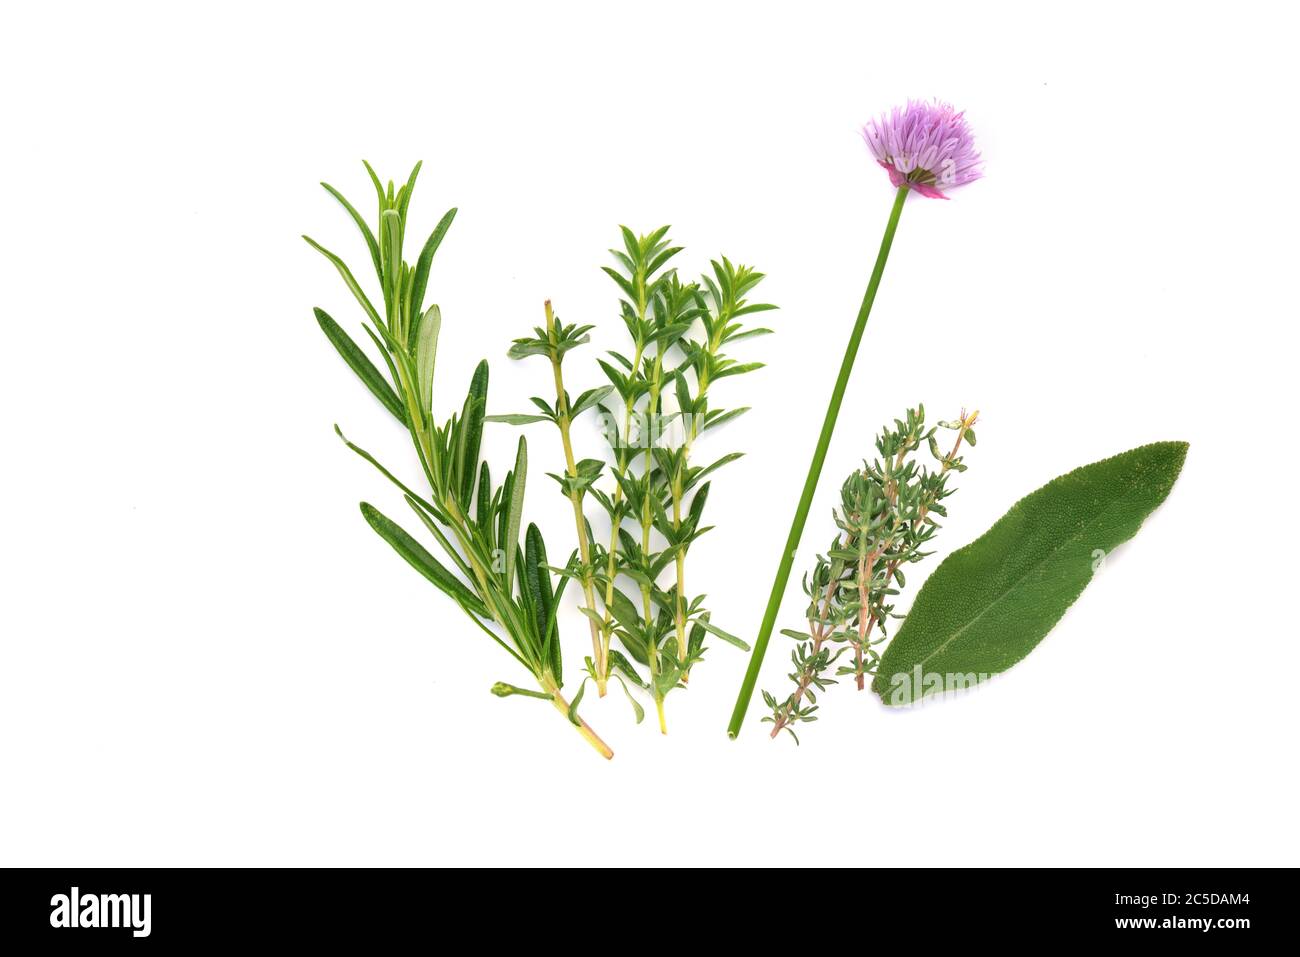 various fresh aromatic herbs with chive blooming on white background Stock Photo